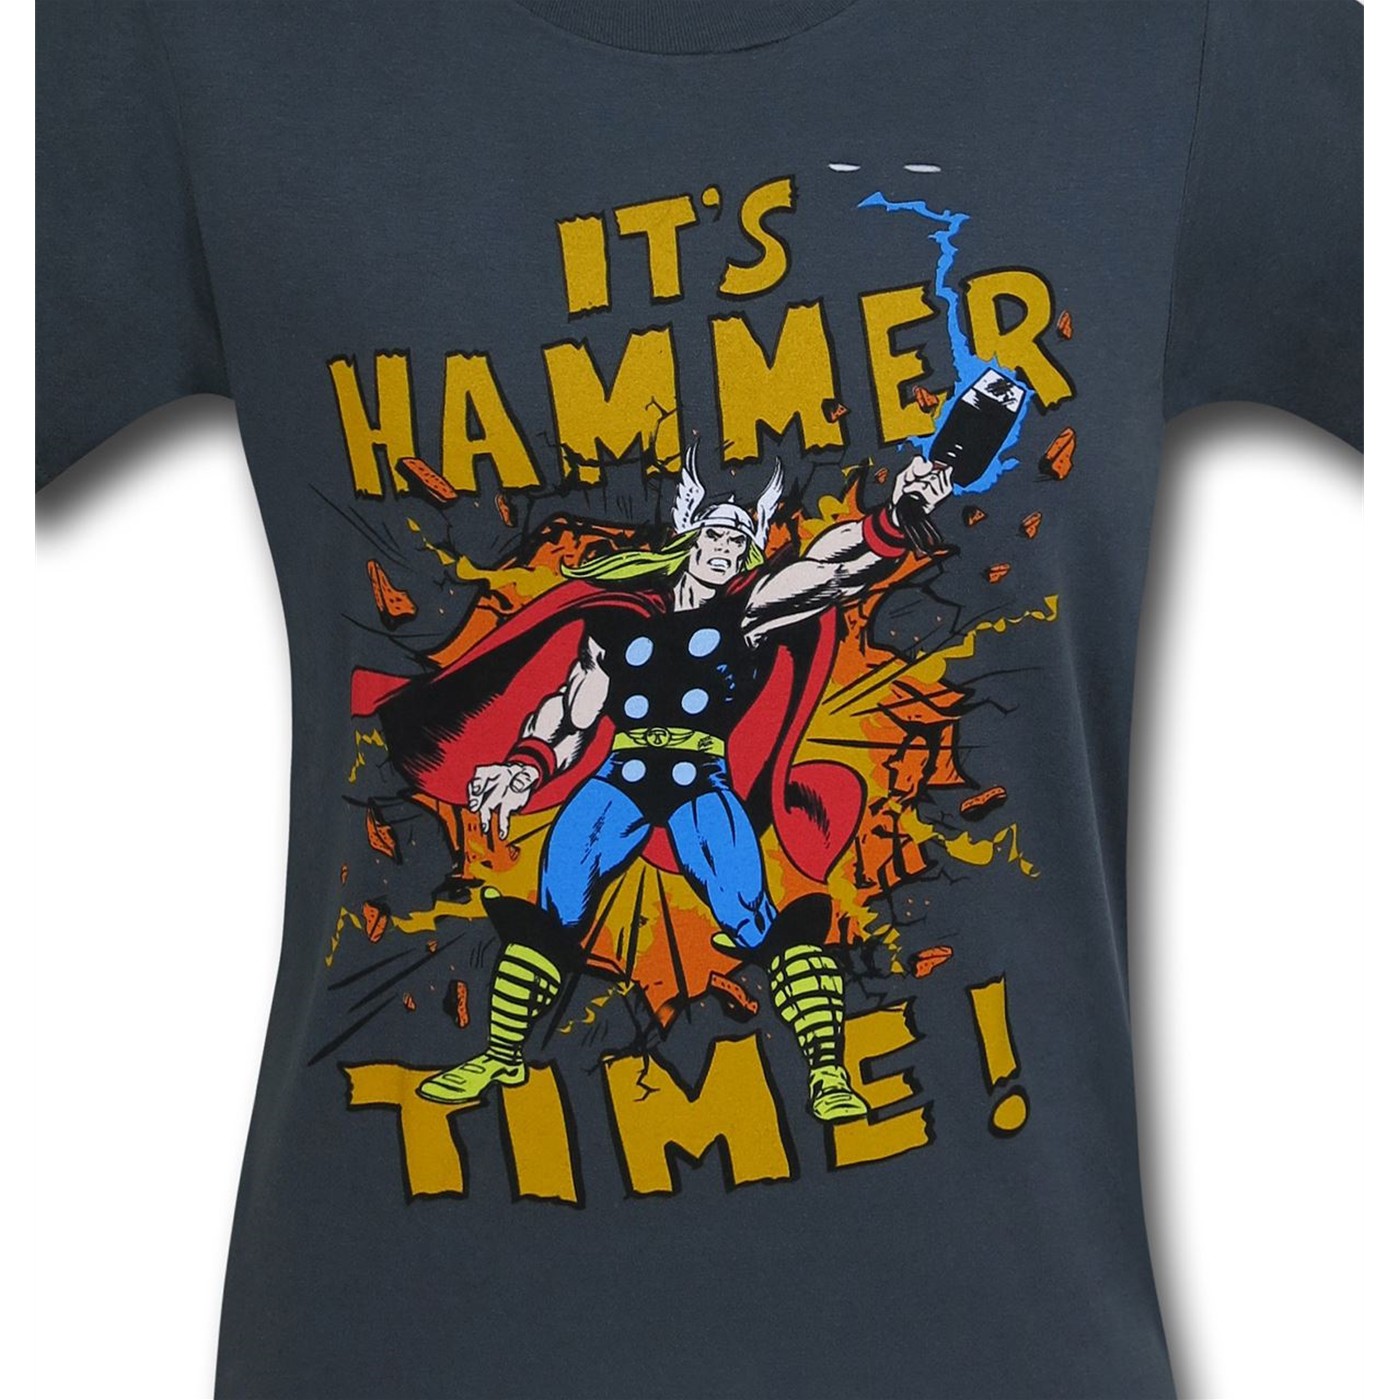 Thor Time of the Hammer 30 Single T-Shirt